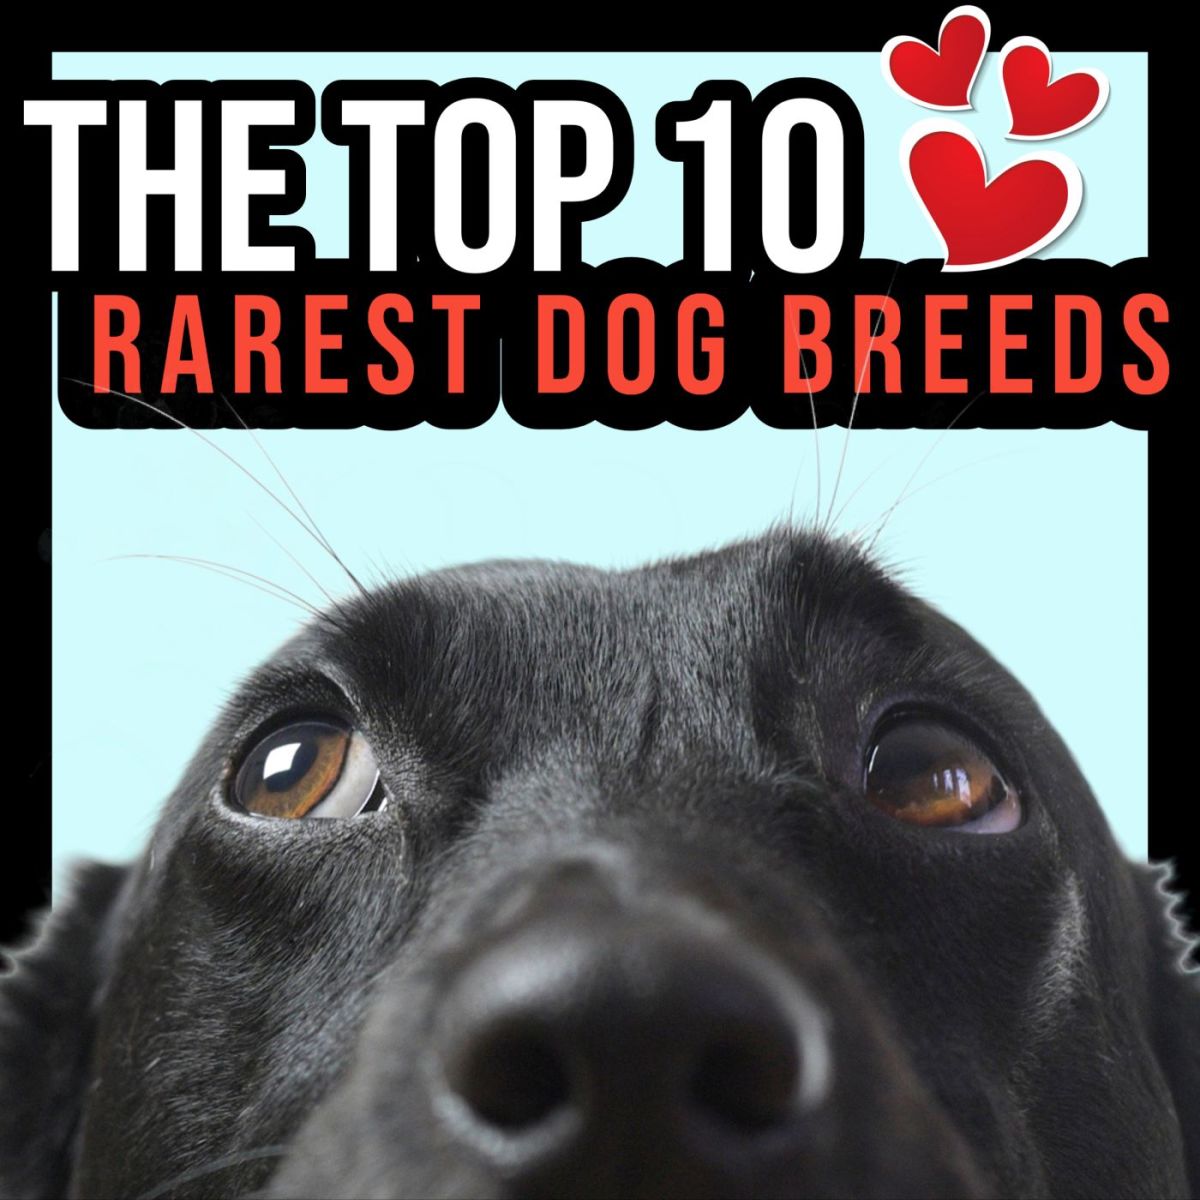 From the Otterhound to the Chinook, this article ranks the 10 rarest dog breeds in the world!